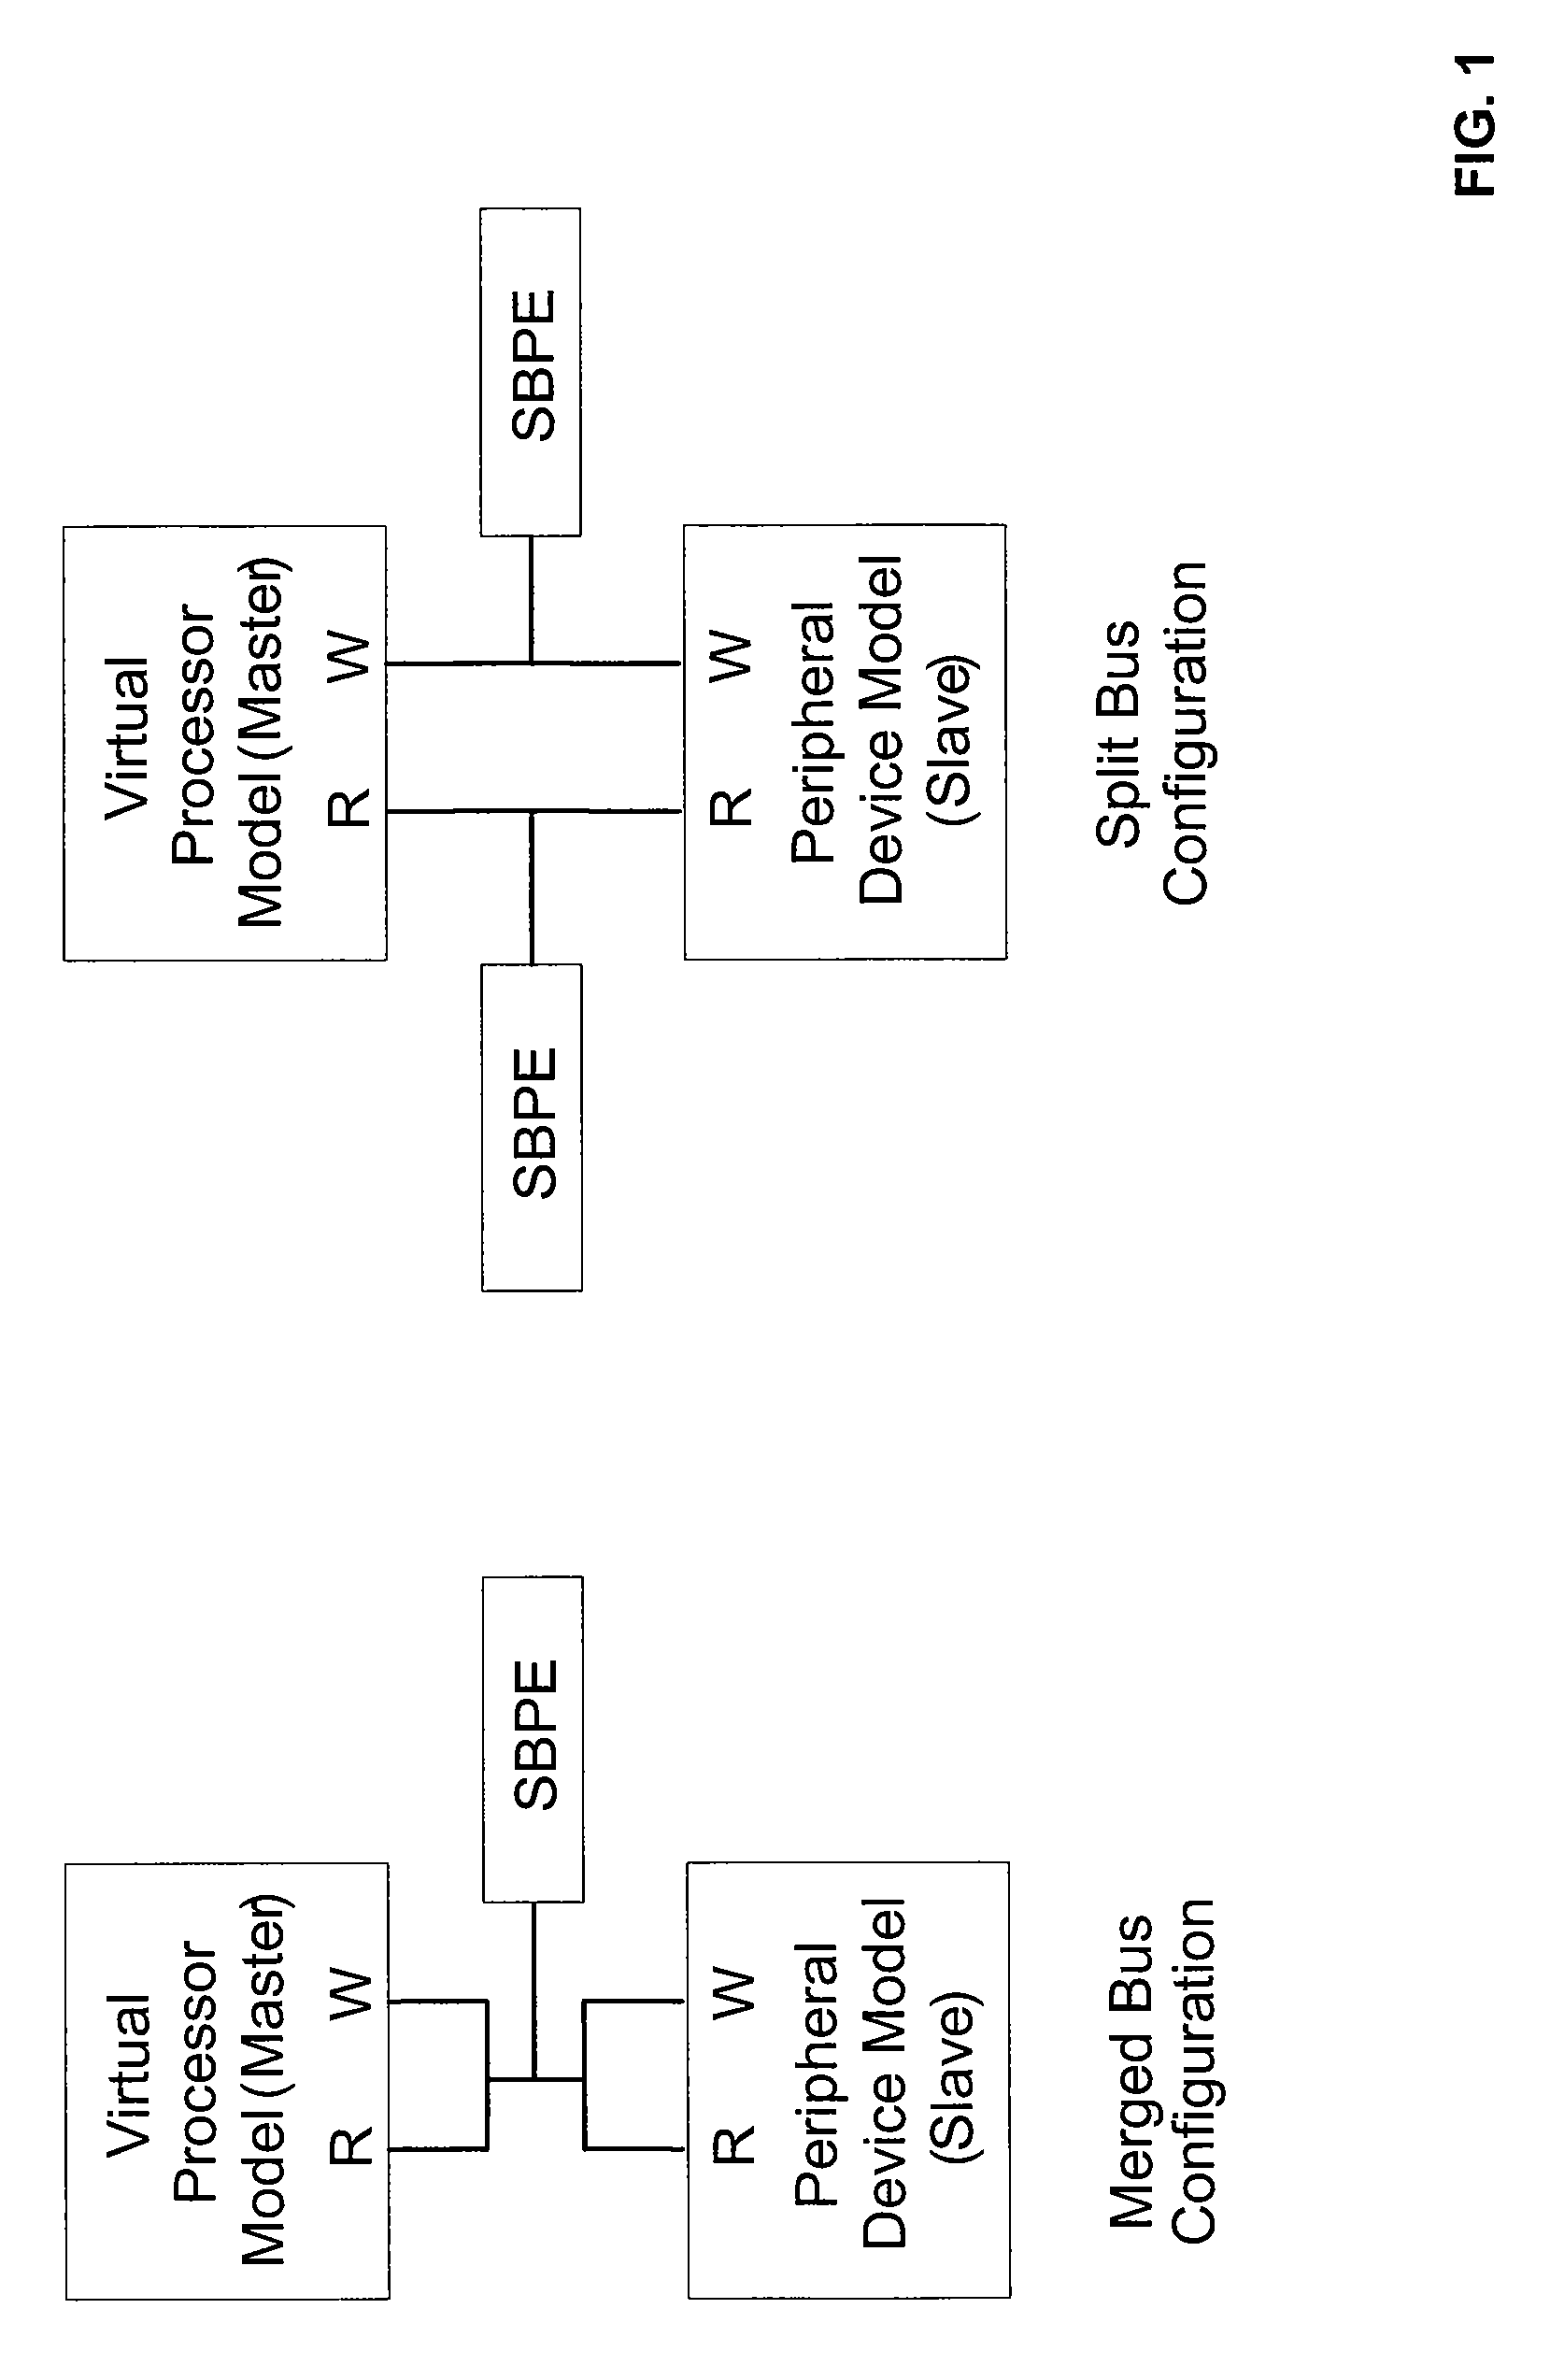 Method and System for Modeling a Bus for a System Design Incorporating One or More Programmable Processors